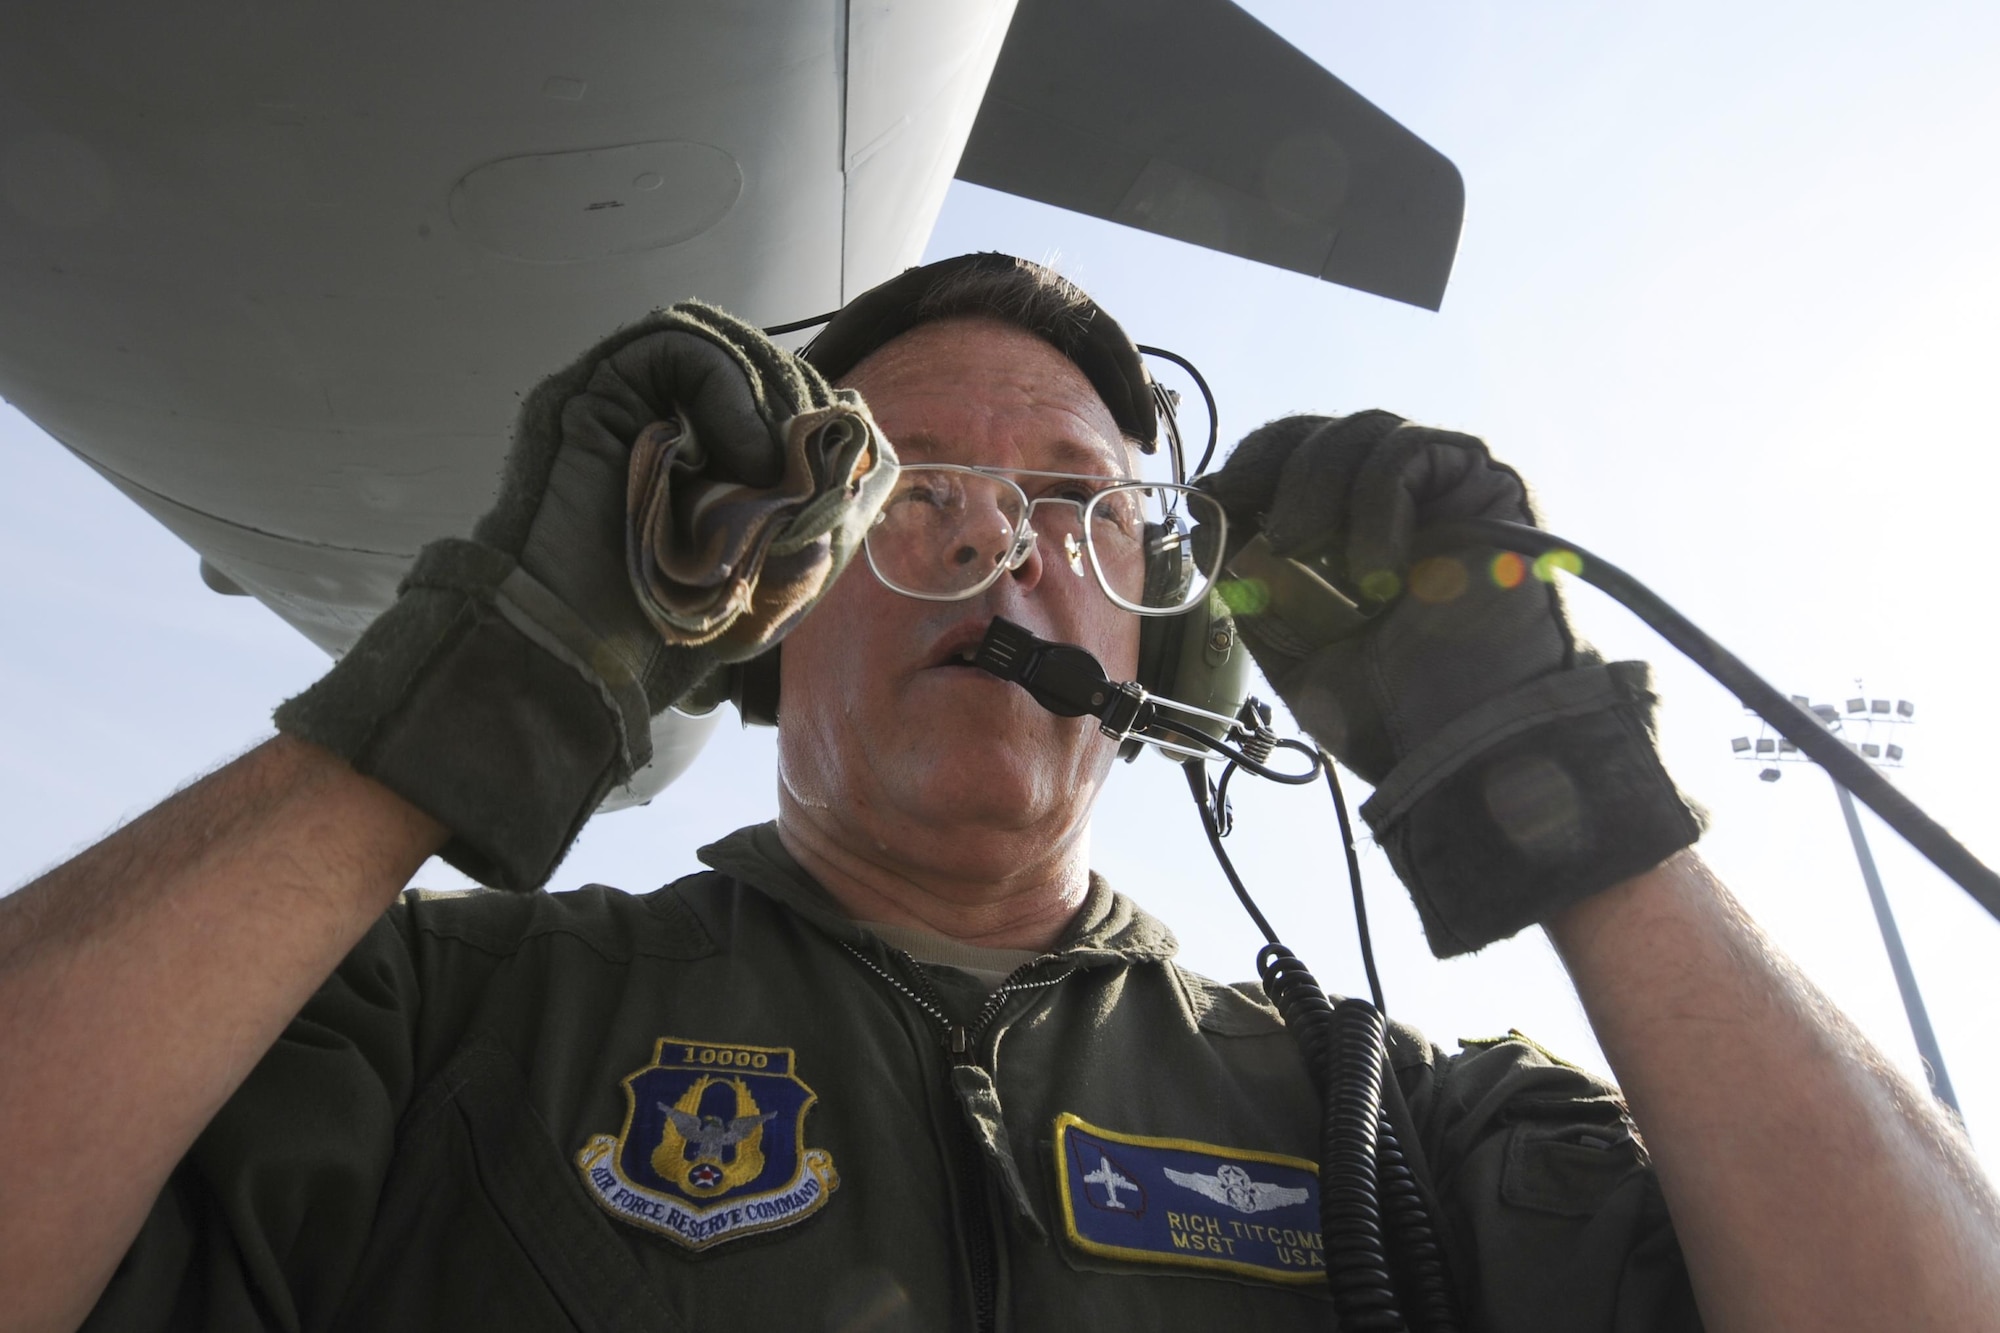 Master Sgt. Richard Titcomb, 339th Flight Test Squadron C-5 flight engineer, readjusts his glasses while performing pre-flight checks to a C-5M Super Galaxy March 29, 2017, at Robins Air Force Base, Ga. Titcomb has been with the squadron for nearly two years. (U.S. Air Force photo by Jamal D. Sutter)